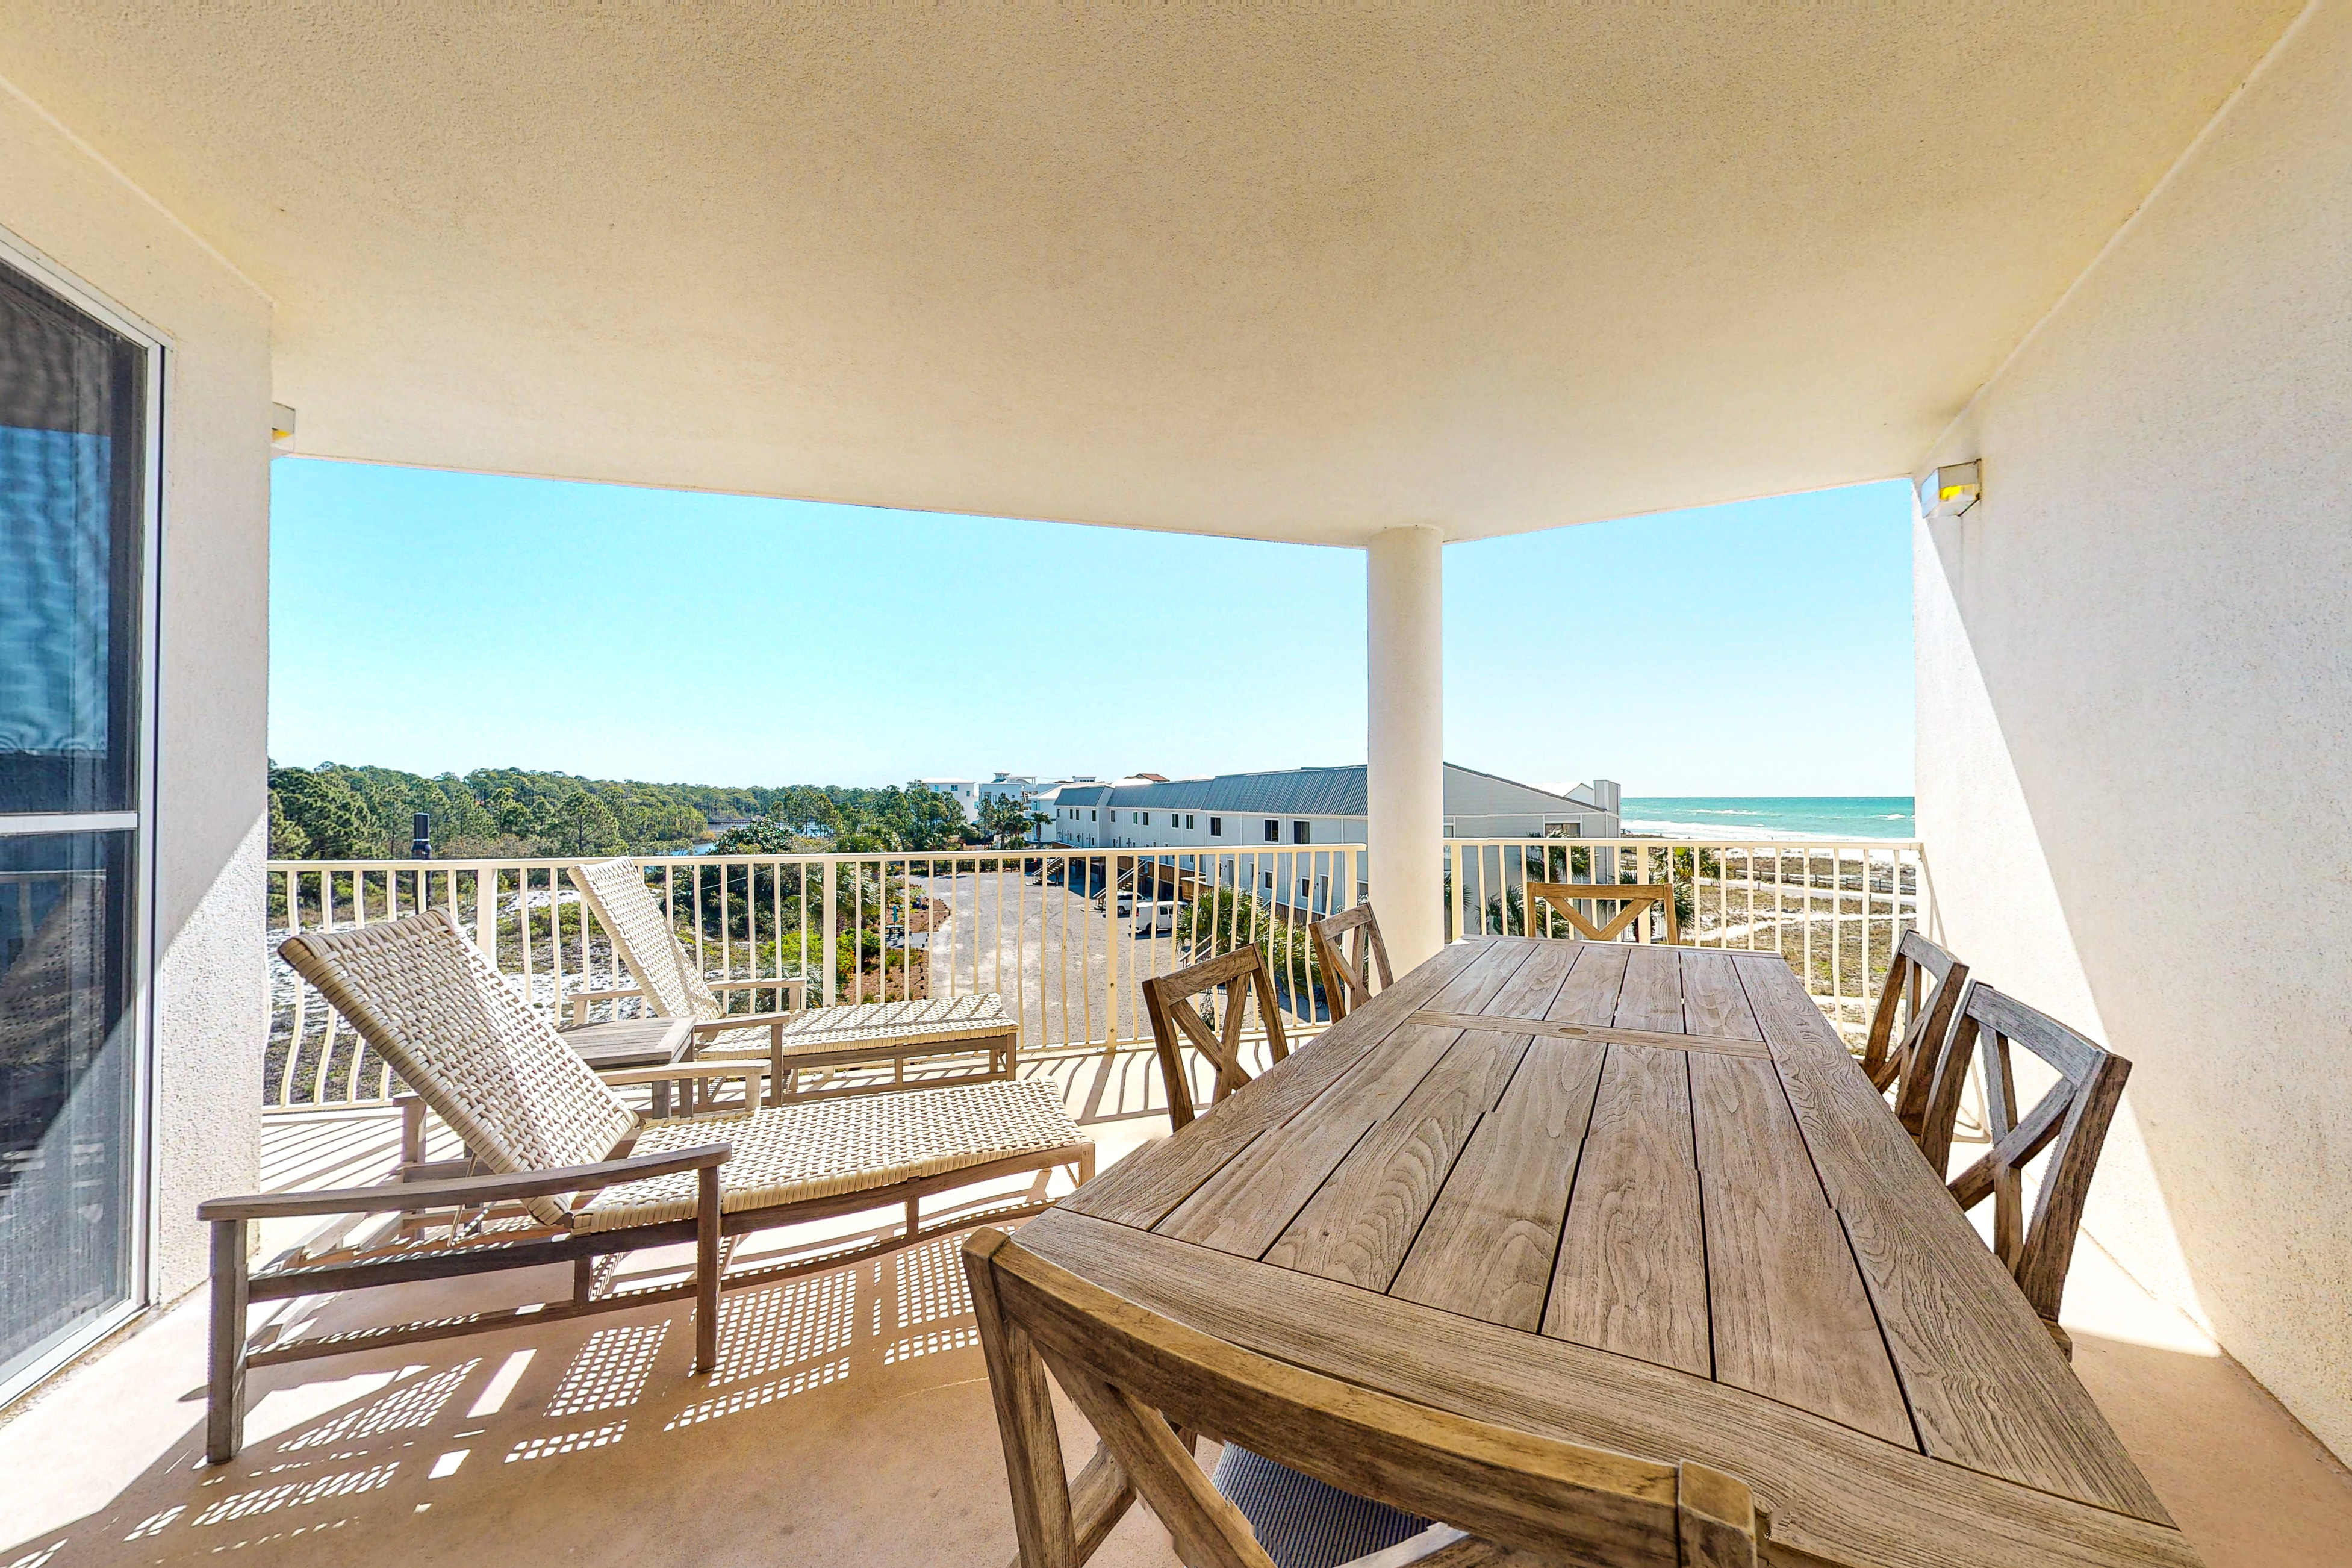 Dunes of Seagrove A301 Condo rental in Dunes of Seagrove in Highway 30-A Florida - #5